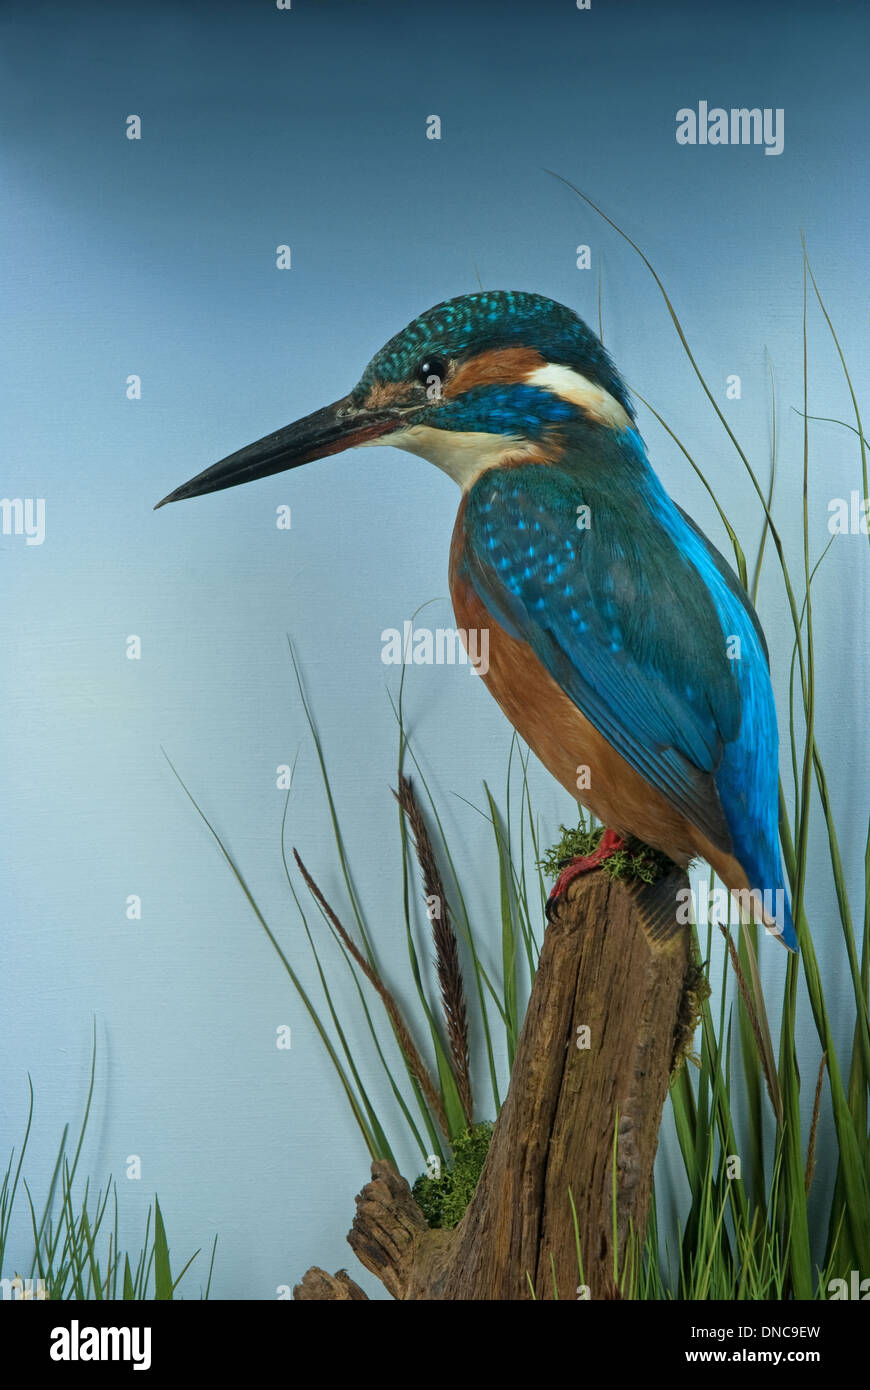 A taxidermically mounted European Kingfisher (Alcedo atthis ispida) set amongst preserved background Stock Photo